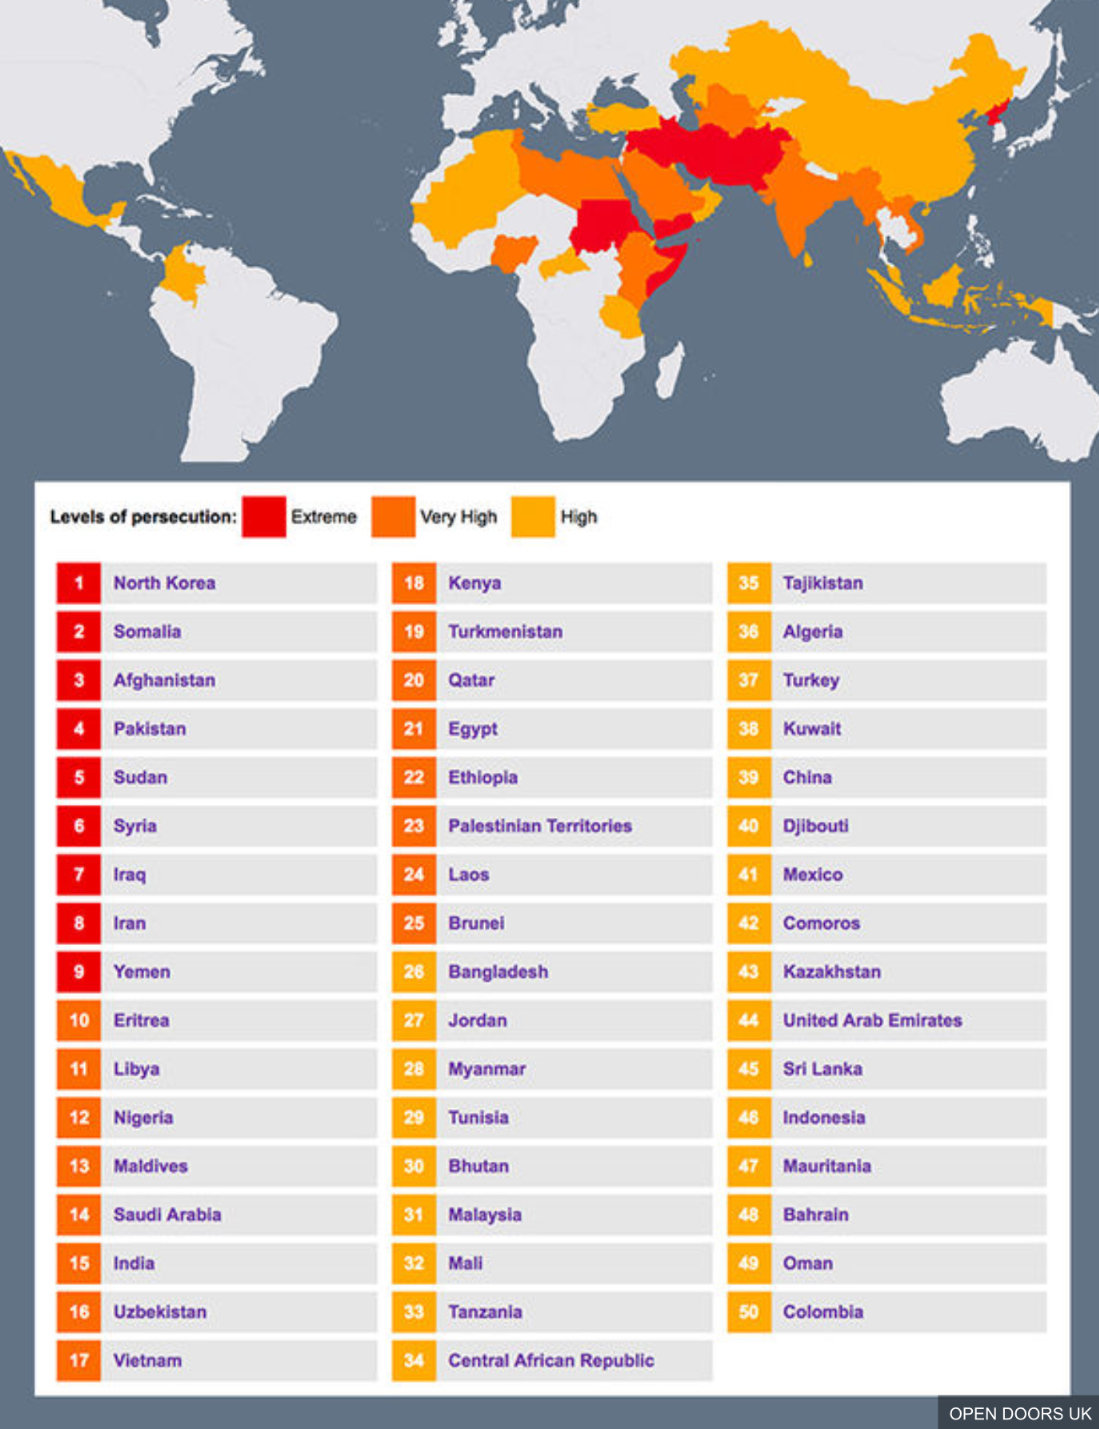 Andreas Fagerbakke on Twitter: "Top 50 Countries It's Most Dangerous to be a Christian.. (2017 study by 'Open Doors') https://t.co/xnUMXSiVMQ" / Twitter